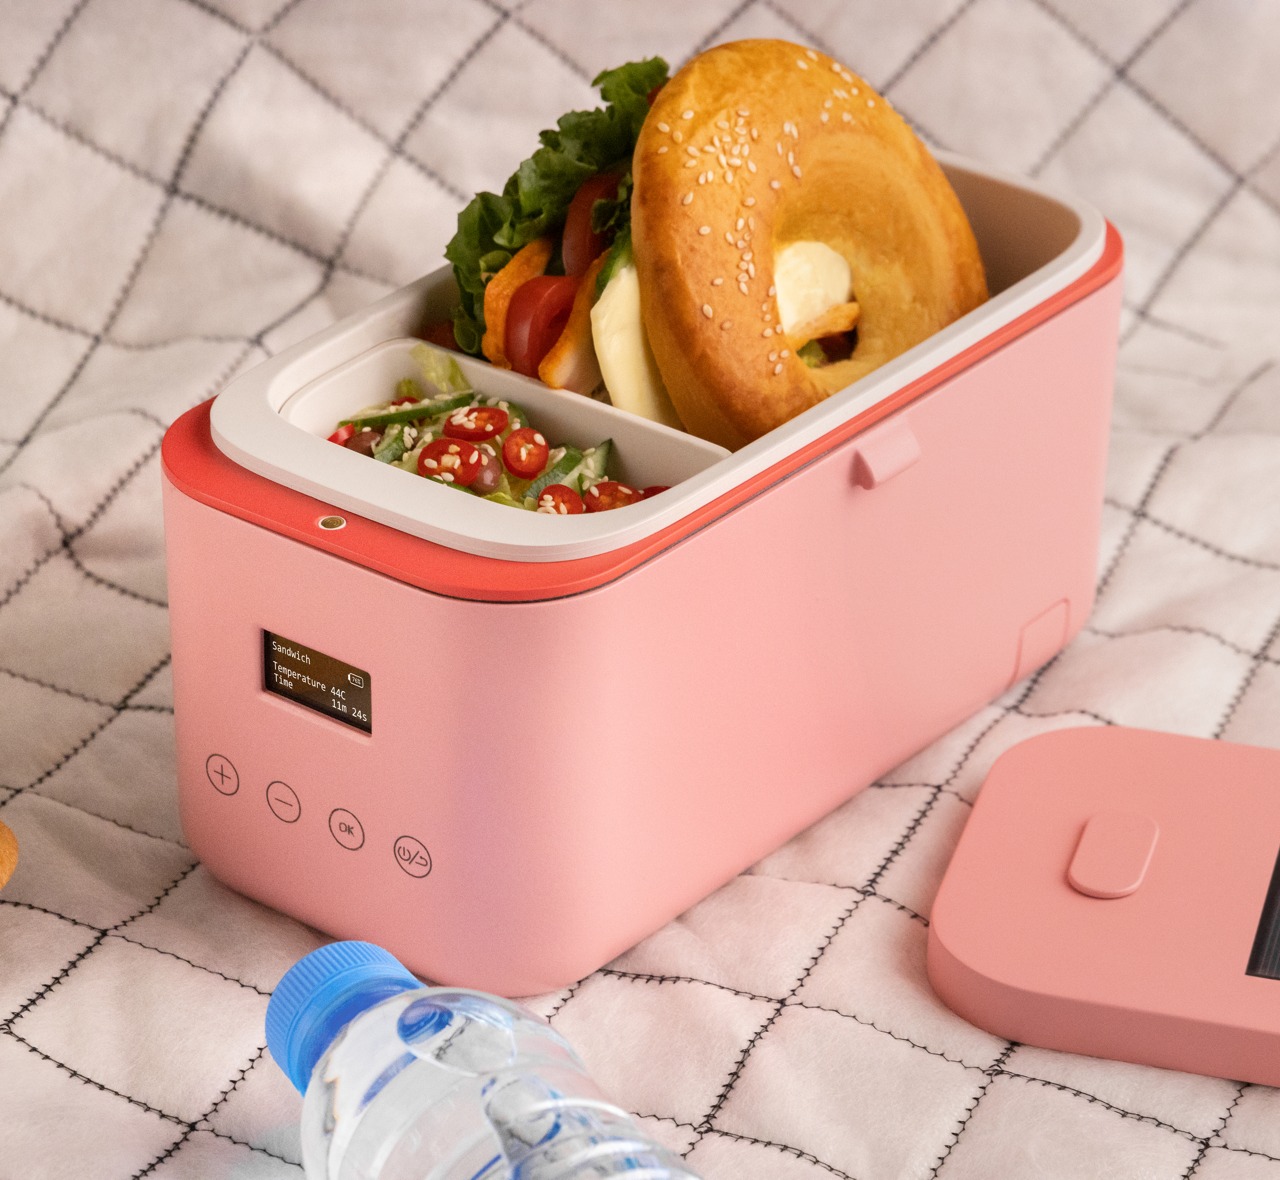 https://www.yankodesign.com/images/design_news/2022/06/solar-powered-lunchbox-keeps-your-food-hot-or-even-cool-depending-on-whats-inside/solar-powered_self_heating_and_cooling_lunchvbox_06.jpg